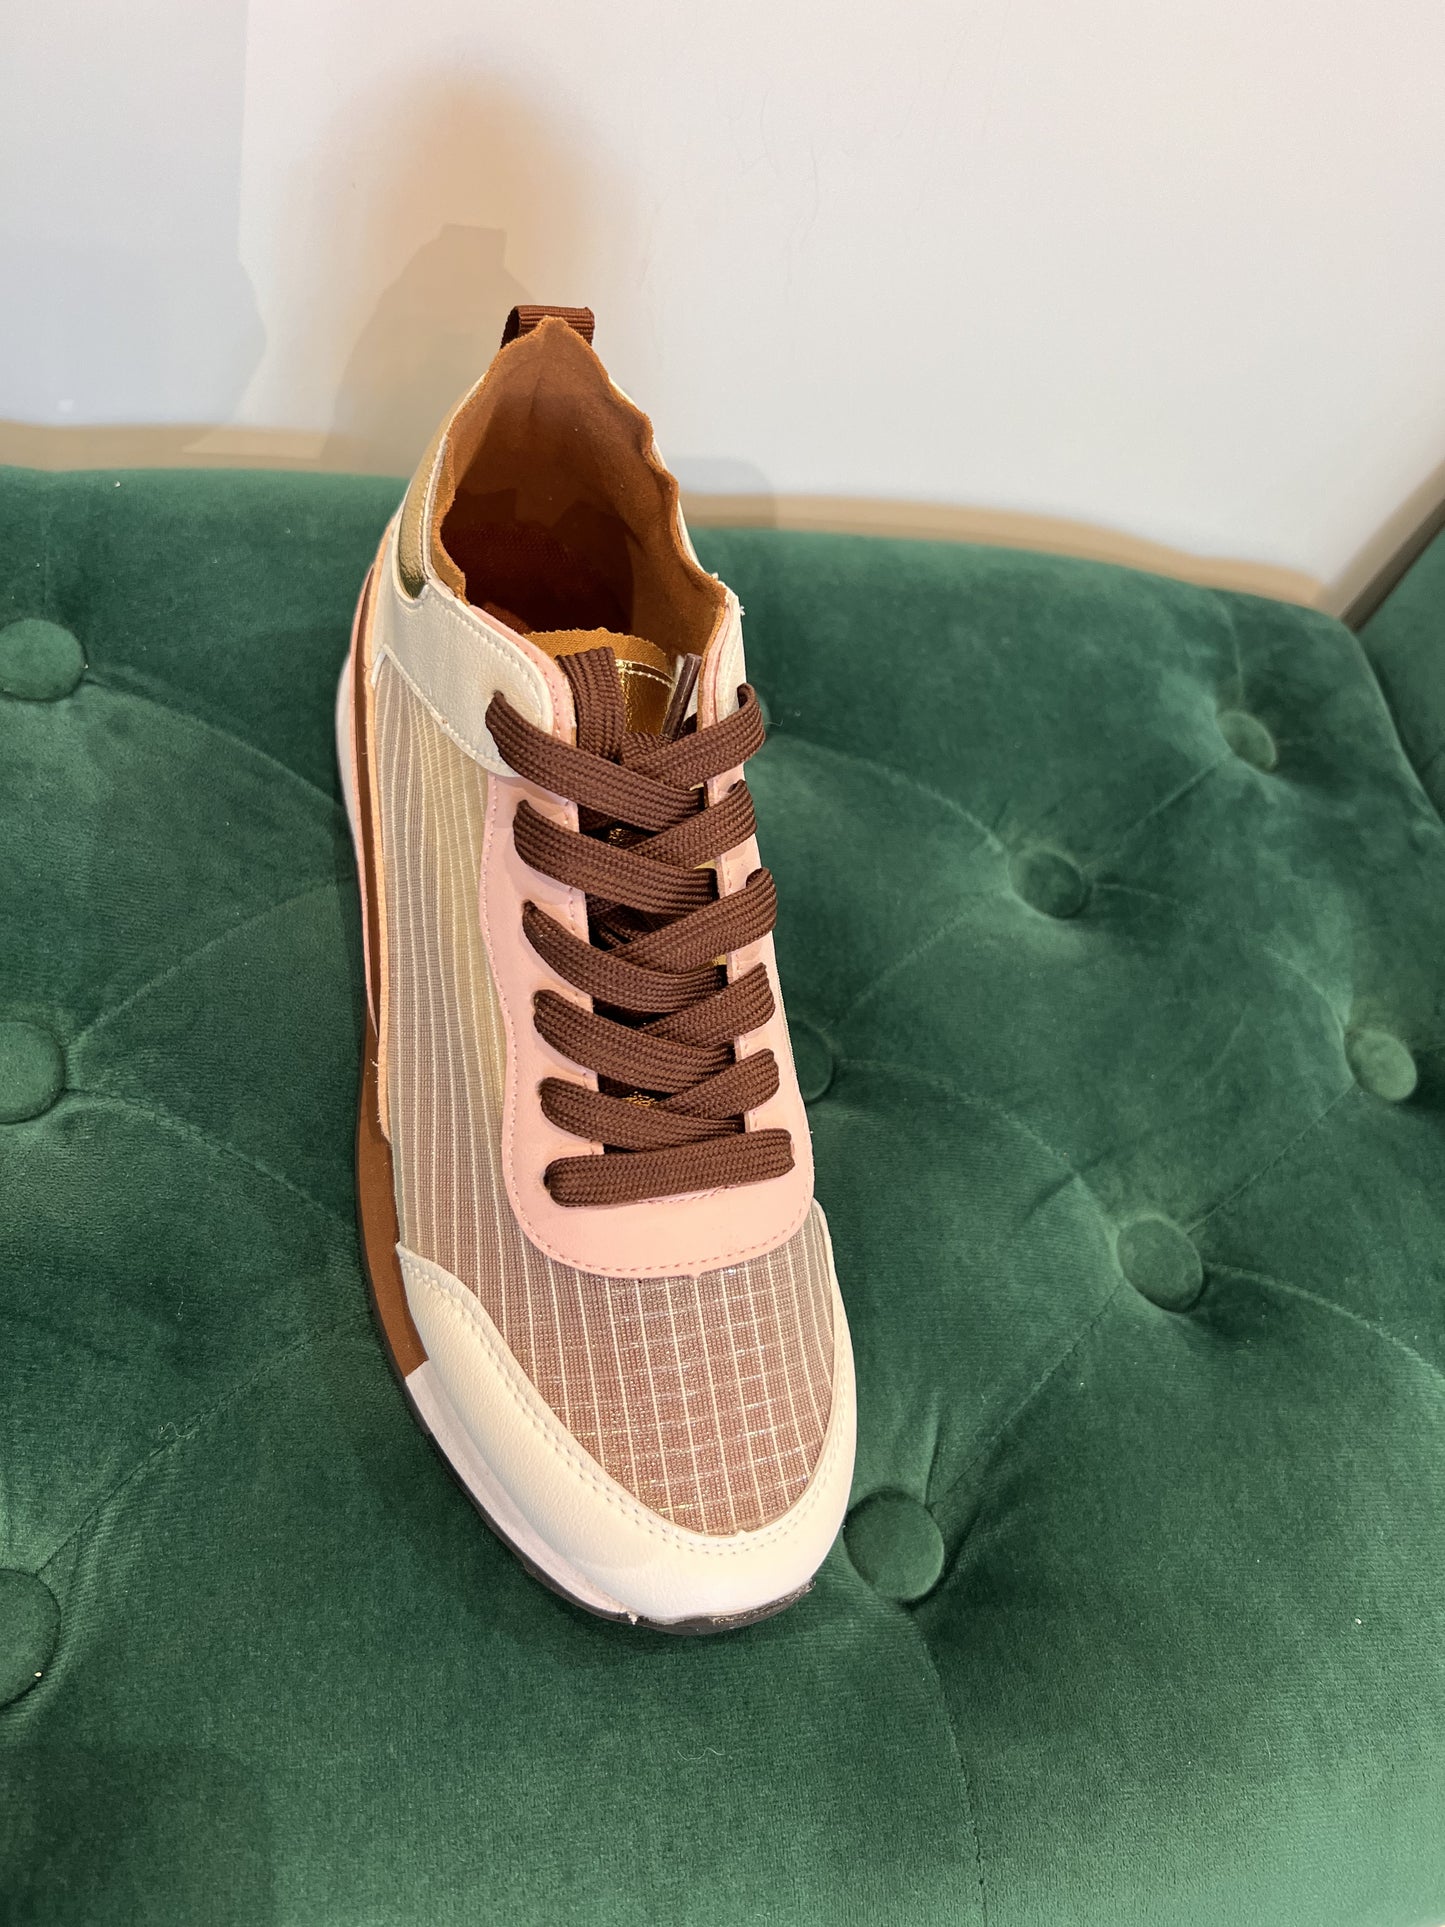 Sneakers pelle cacao bianco rosa